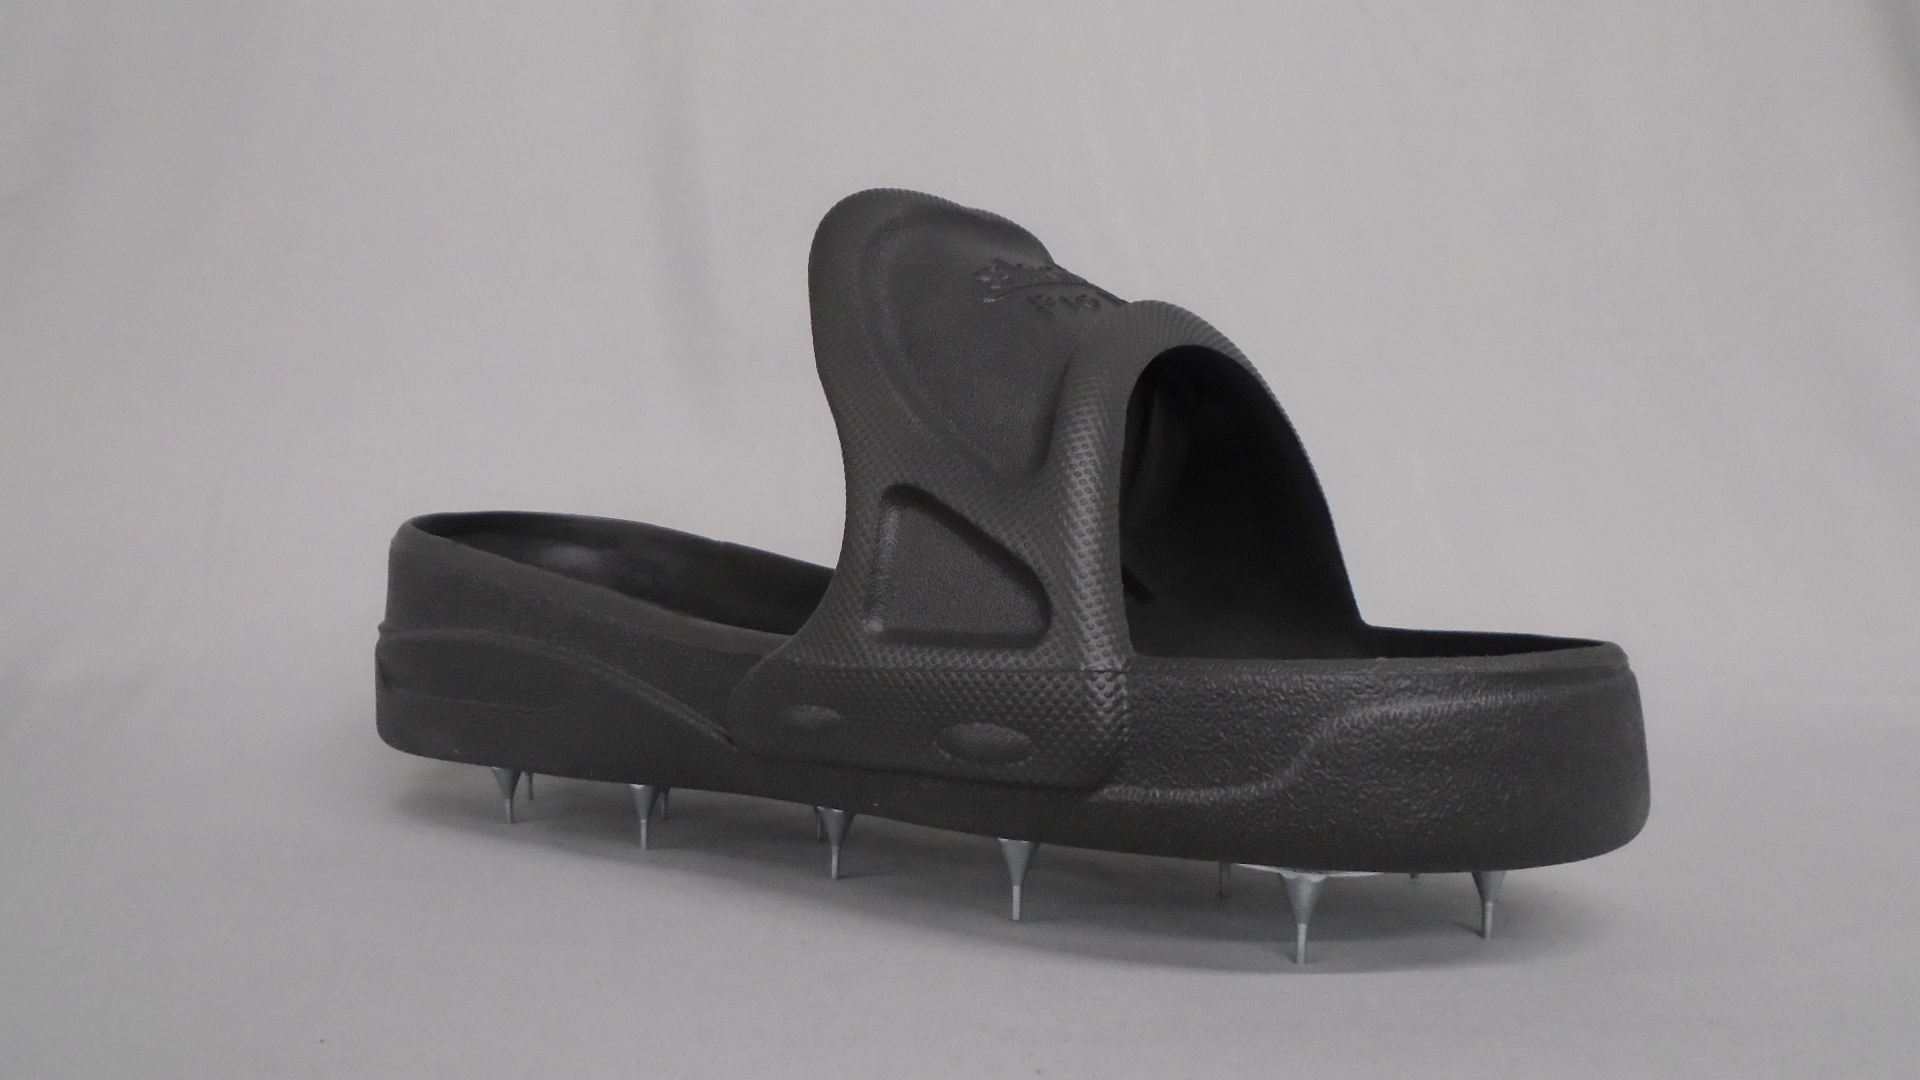 Seymour Midwest Surespikes Spiked Shoes for Gunite, Resinous Epoxy Coatings